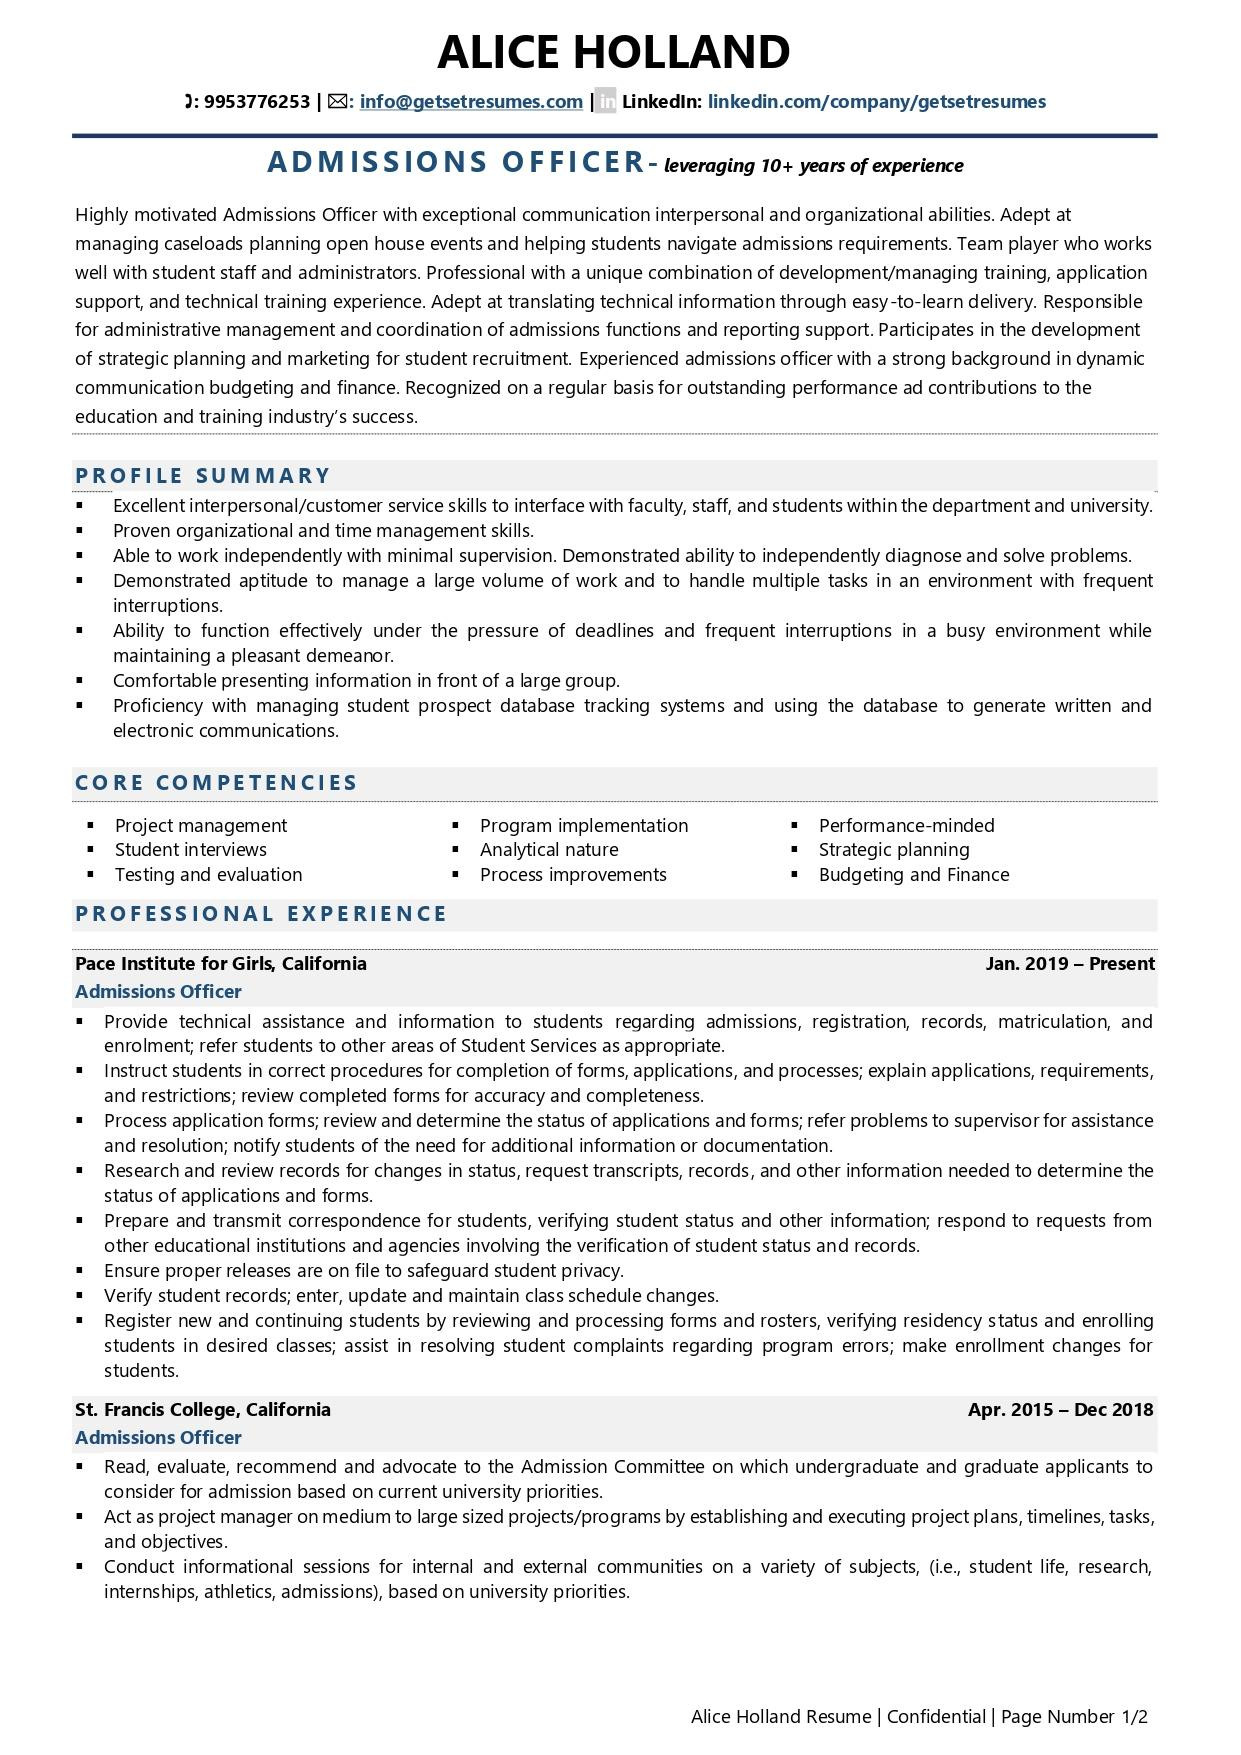 Resume Samples for An Admissions Counselor Admissions Officer Resume Examples & Template (with Job Winning Tips)